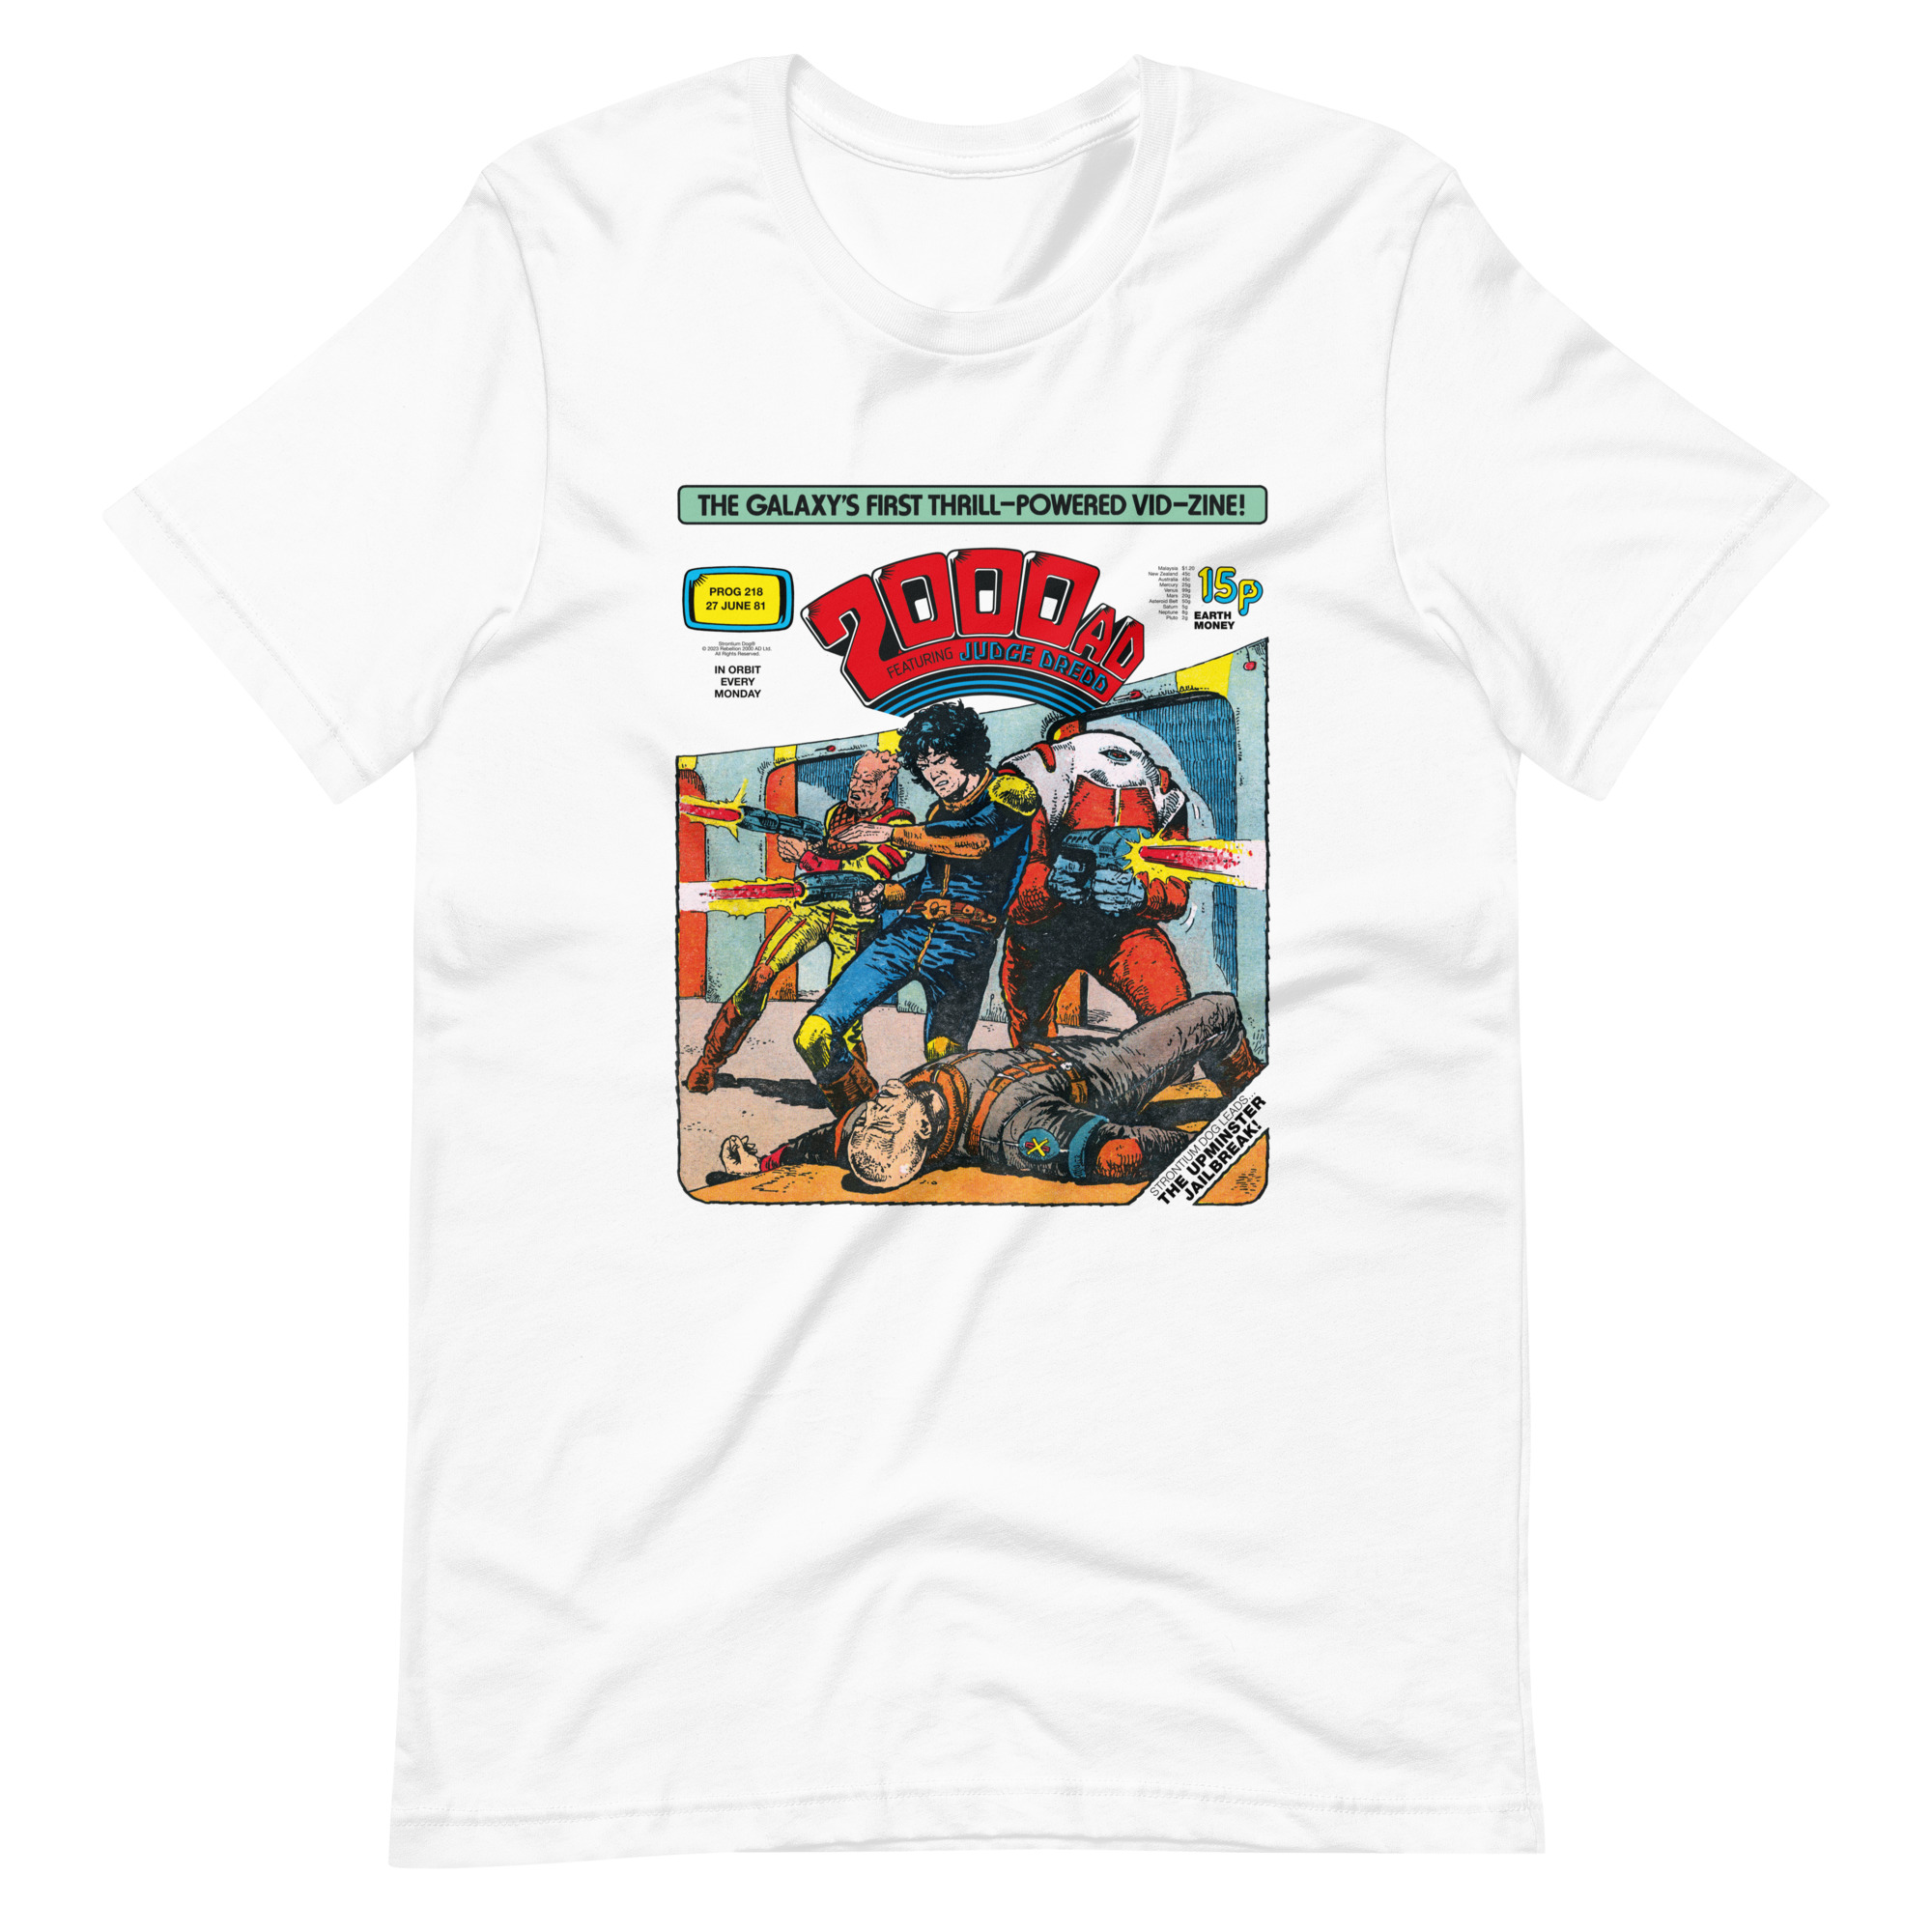 White Tshirt with an image on the chest. Image is cover of 2000 AD prog 218 and shows Strontium Dog and his allies, guns blazing